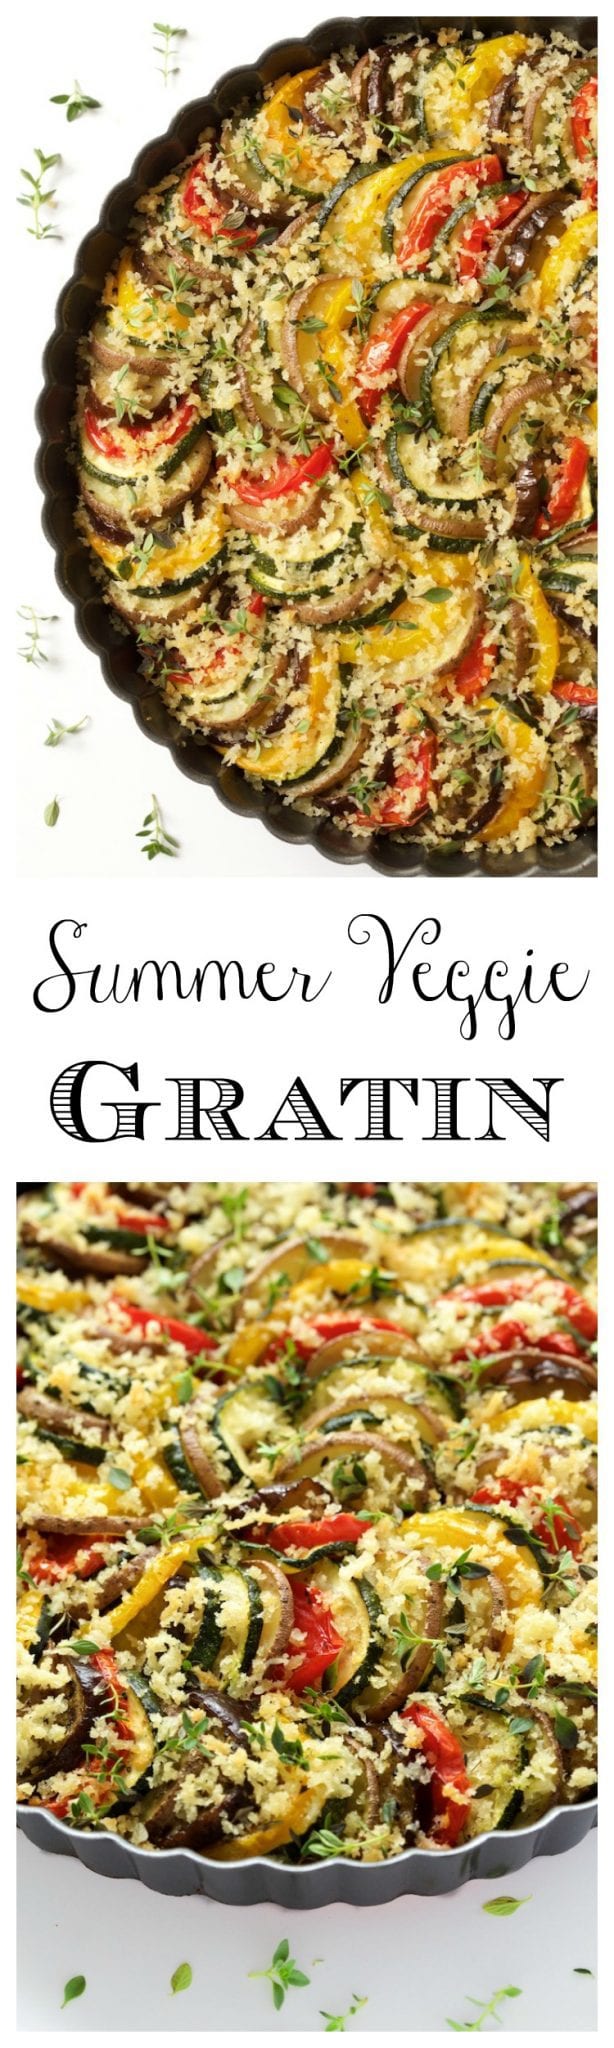 Summer Veggie Gratin - summer's best produce layered, brushed with garlic oil then baked to perfect tenderness. The grand finale is a crisp parmesan bread crumb topping and lots of fresh thyme!